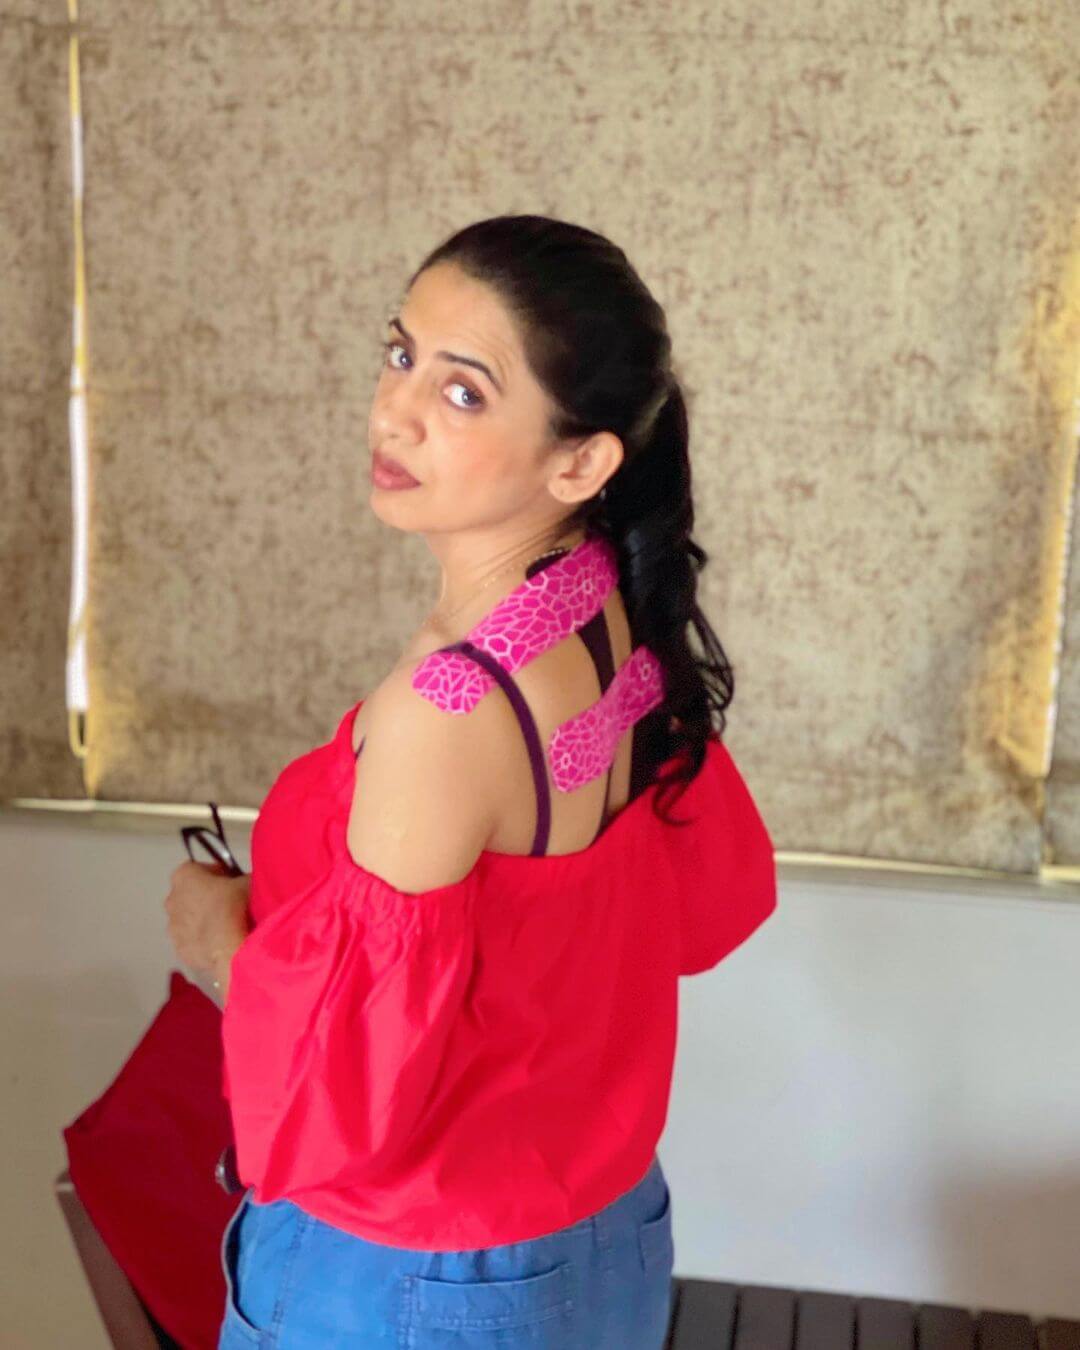 Actress Parinitaa Seth in pink gown shot from back